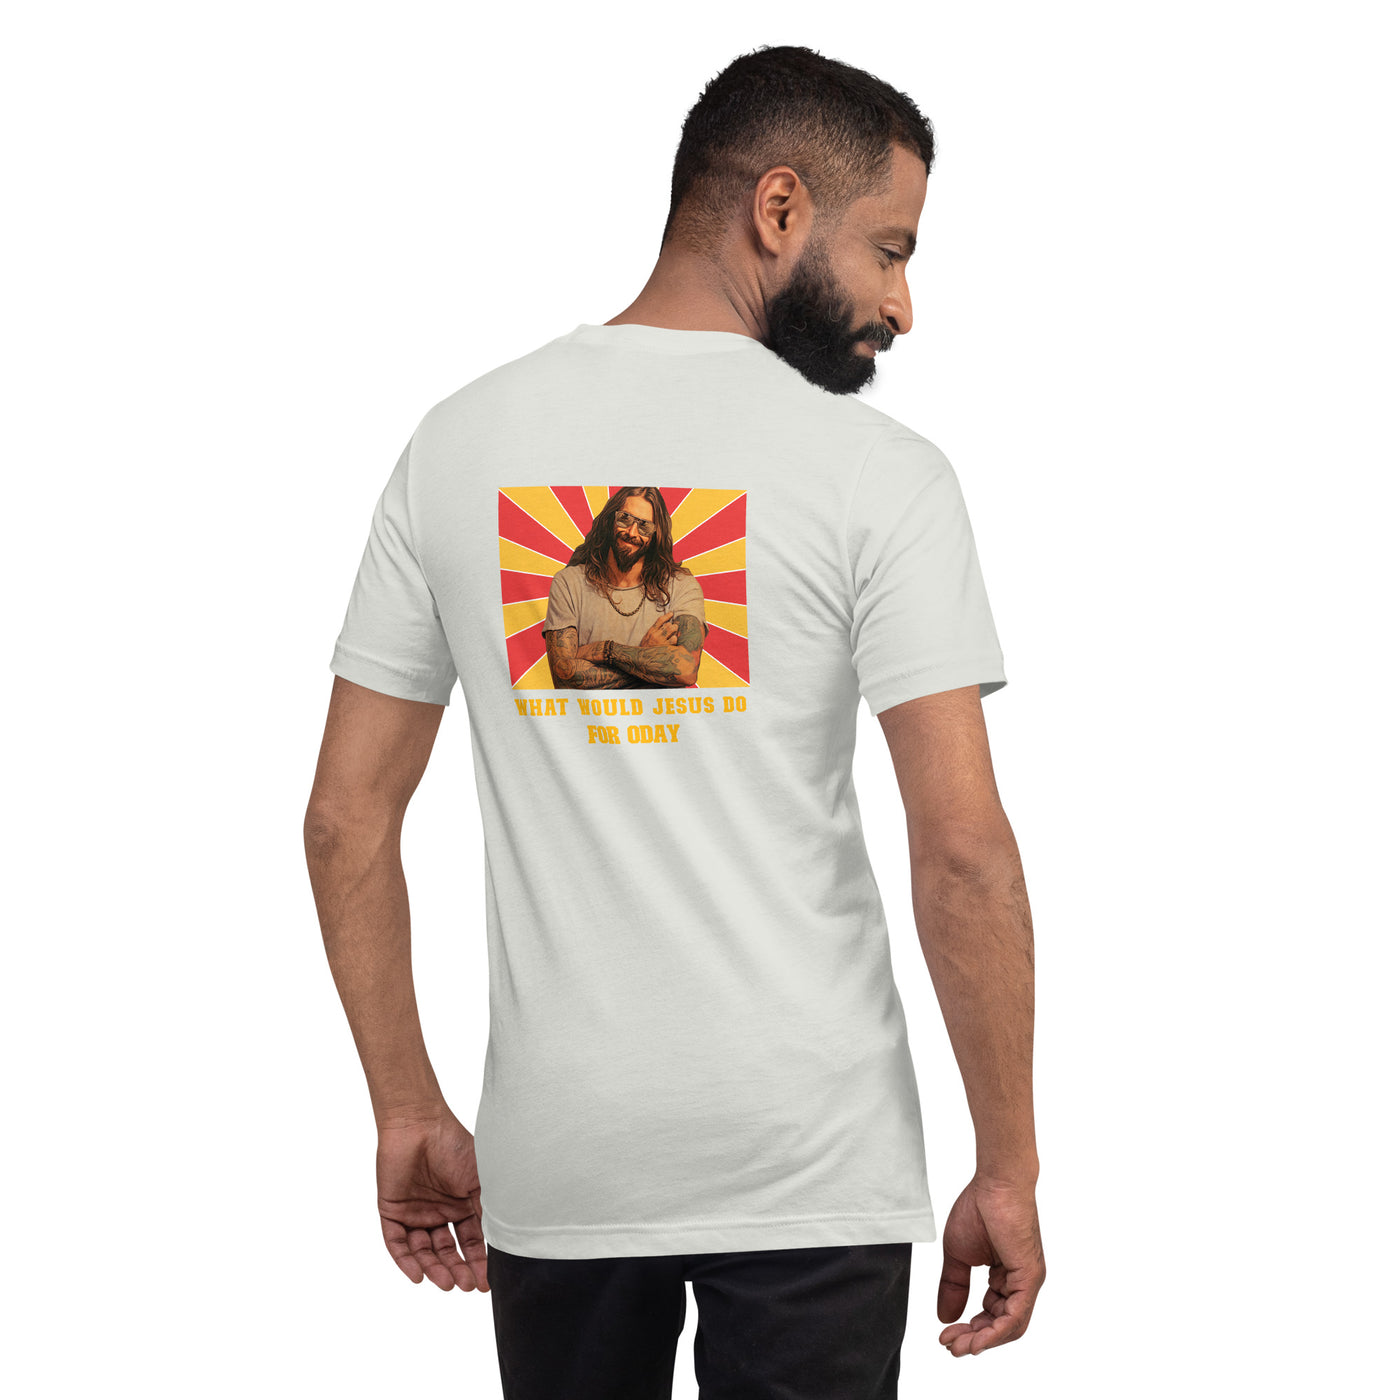 What would Jesus do for 0day v1 - Unisex t-shirt ( Back Print )